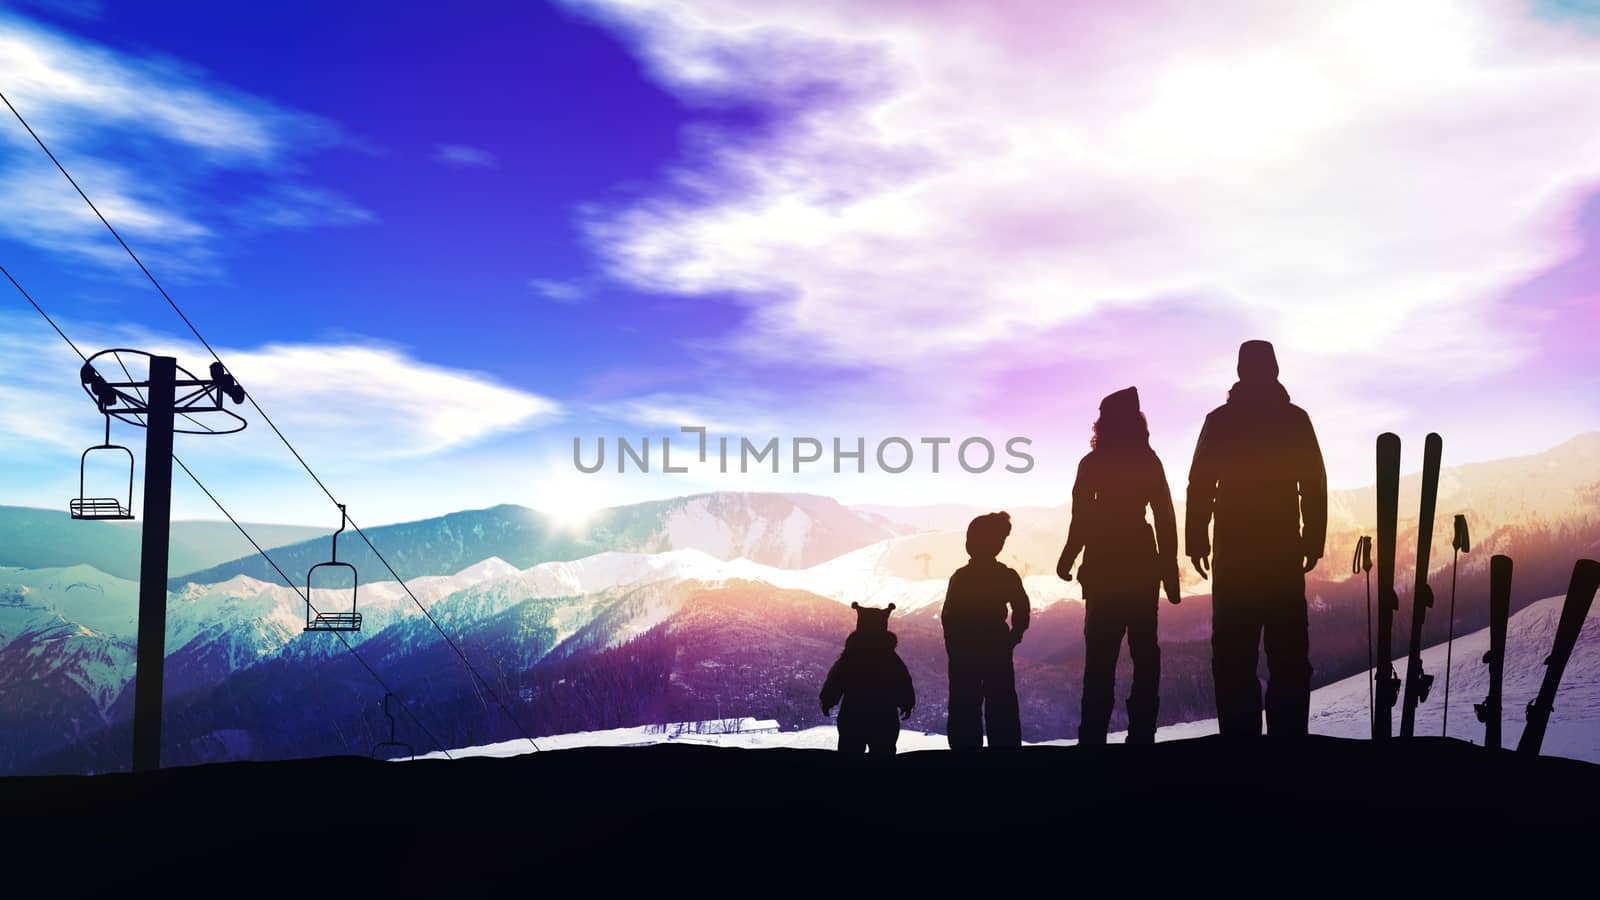 The family is standing on the ski slope opposite the setting sun.